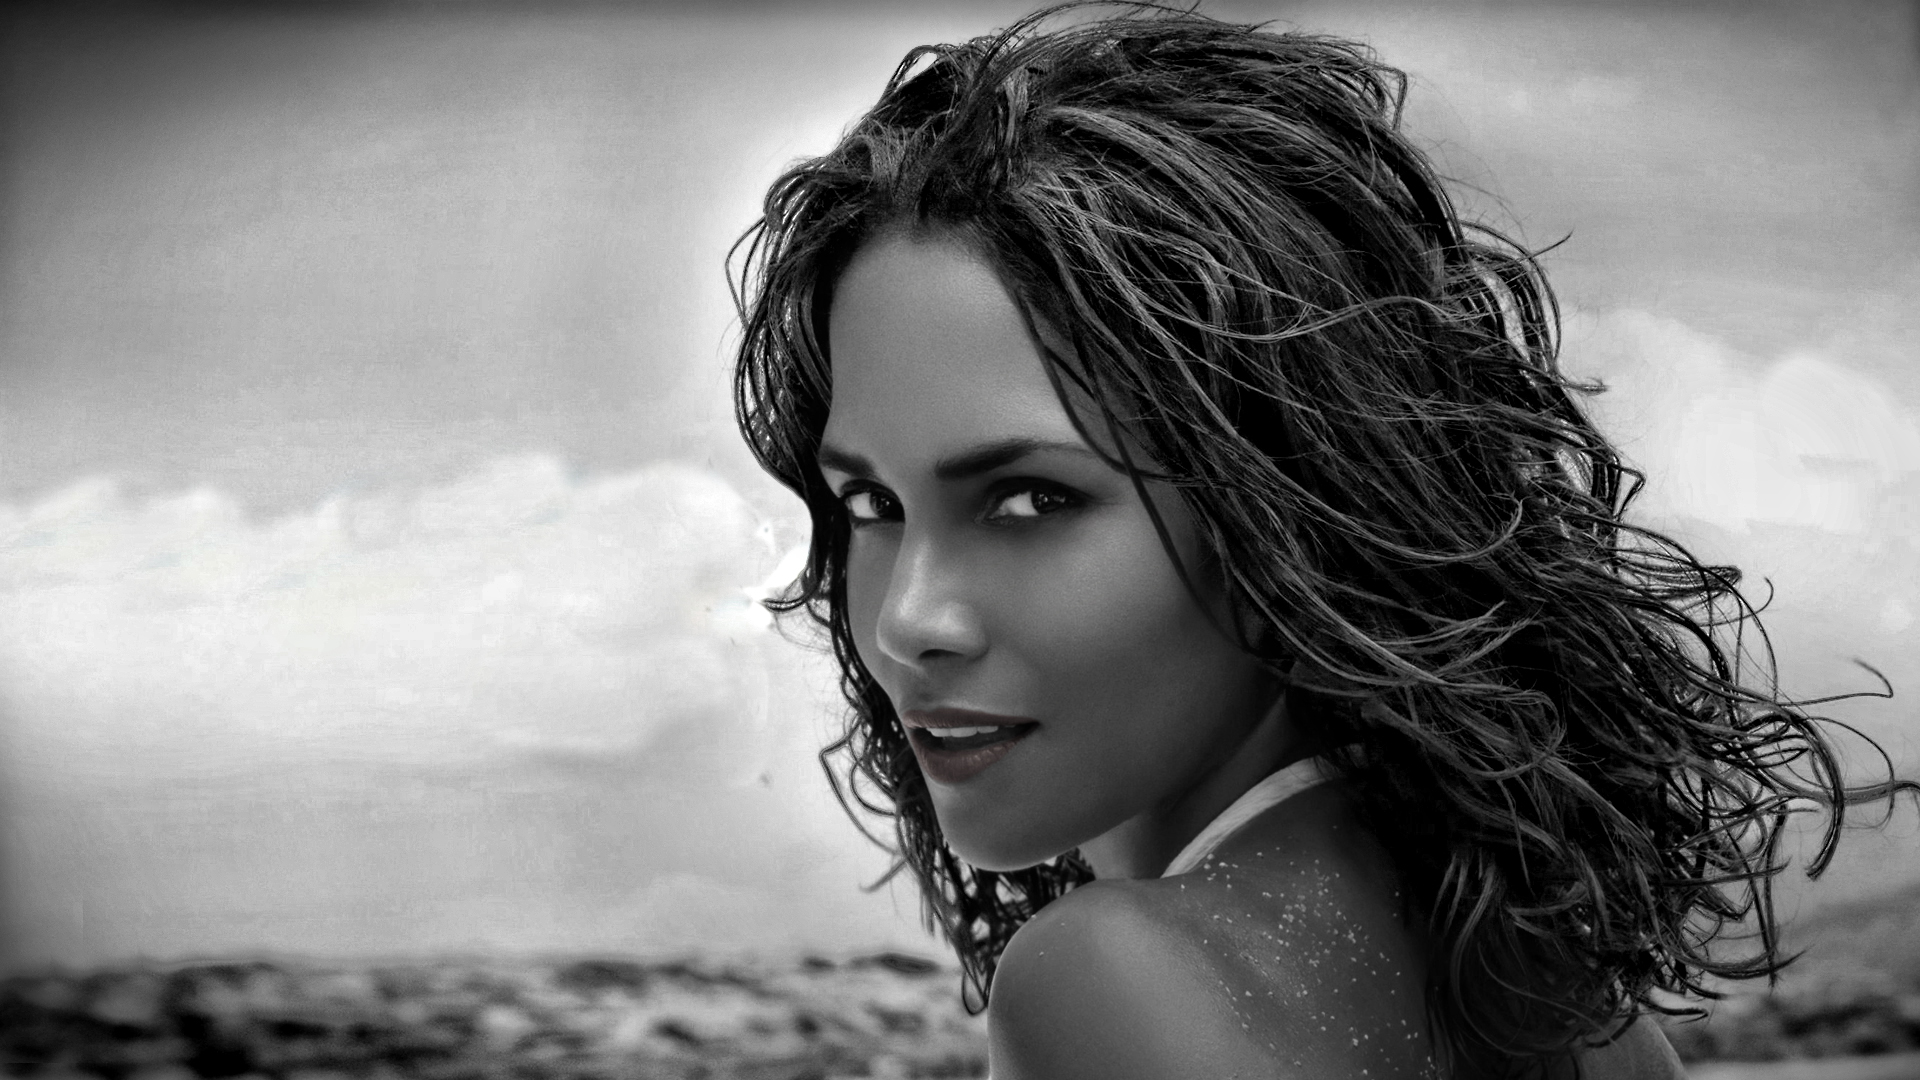 halle berry wallpaper,hair,photograph,face,black,black and white